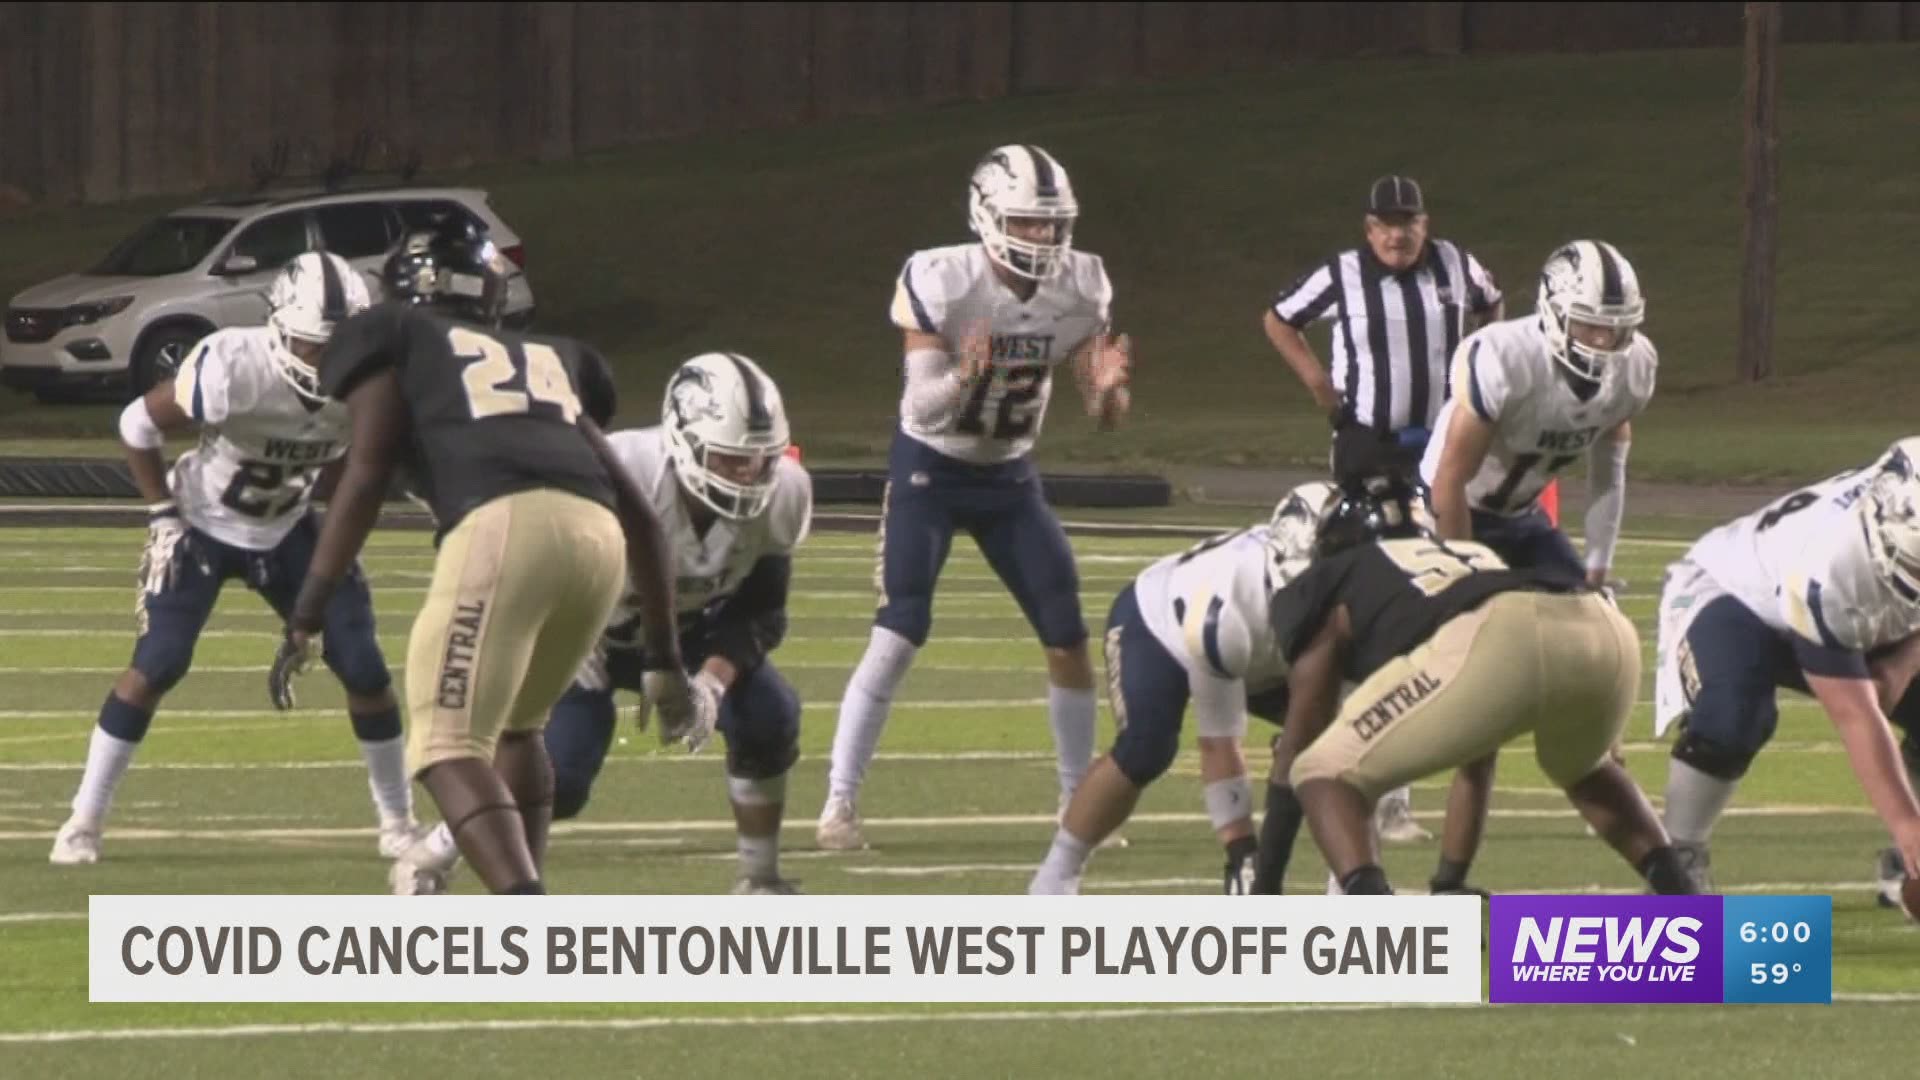 The Bentonville West football team's season has come to an abrupt end after several students and coaches tested positive for COVID-19. https://bit.ly/2K4TBnZ